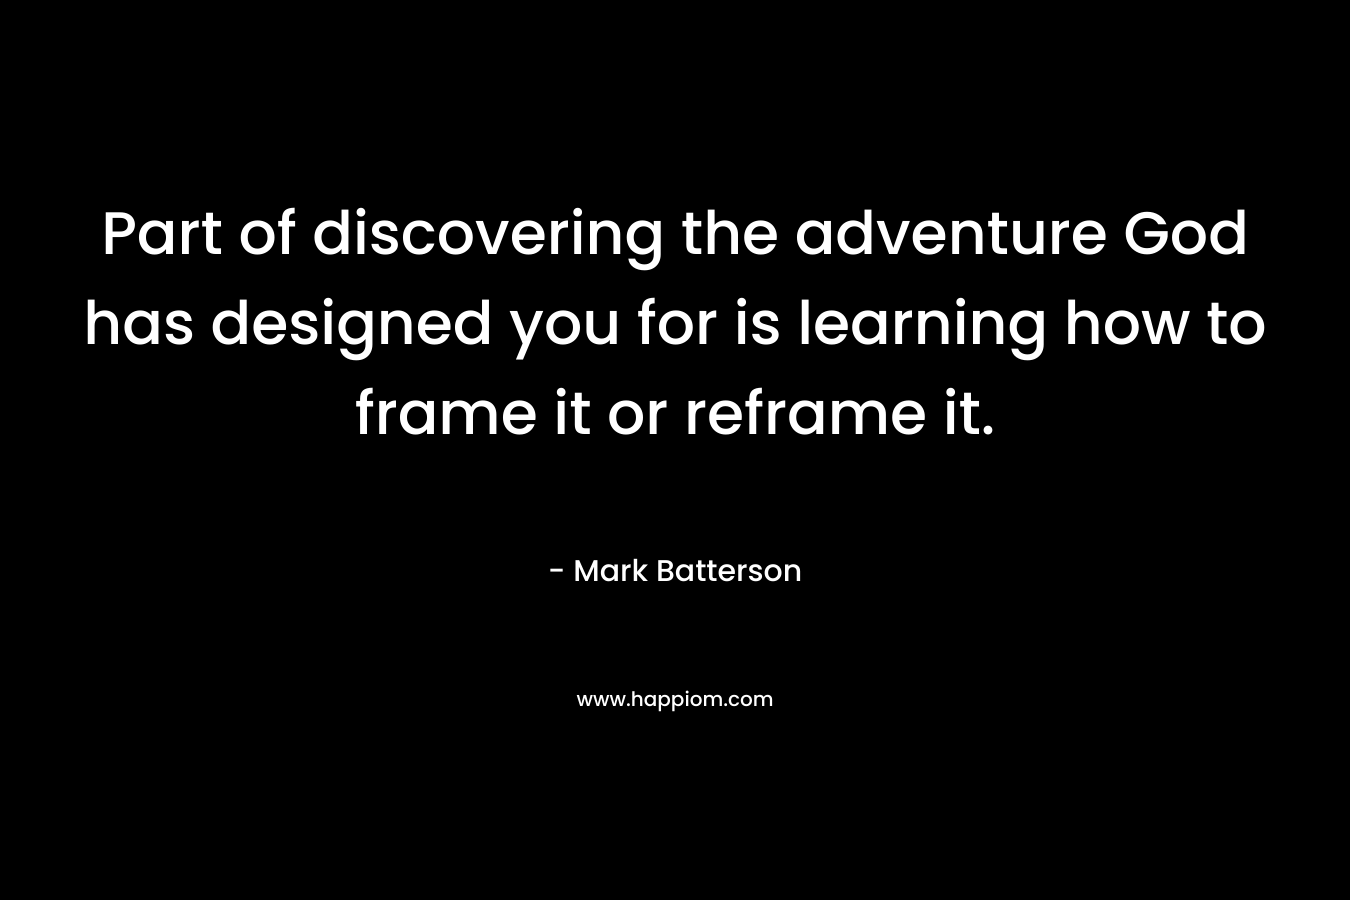 Part of discovering the adventure God has designed you for is learning how to frame it or reframe it. – Mark Batterson